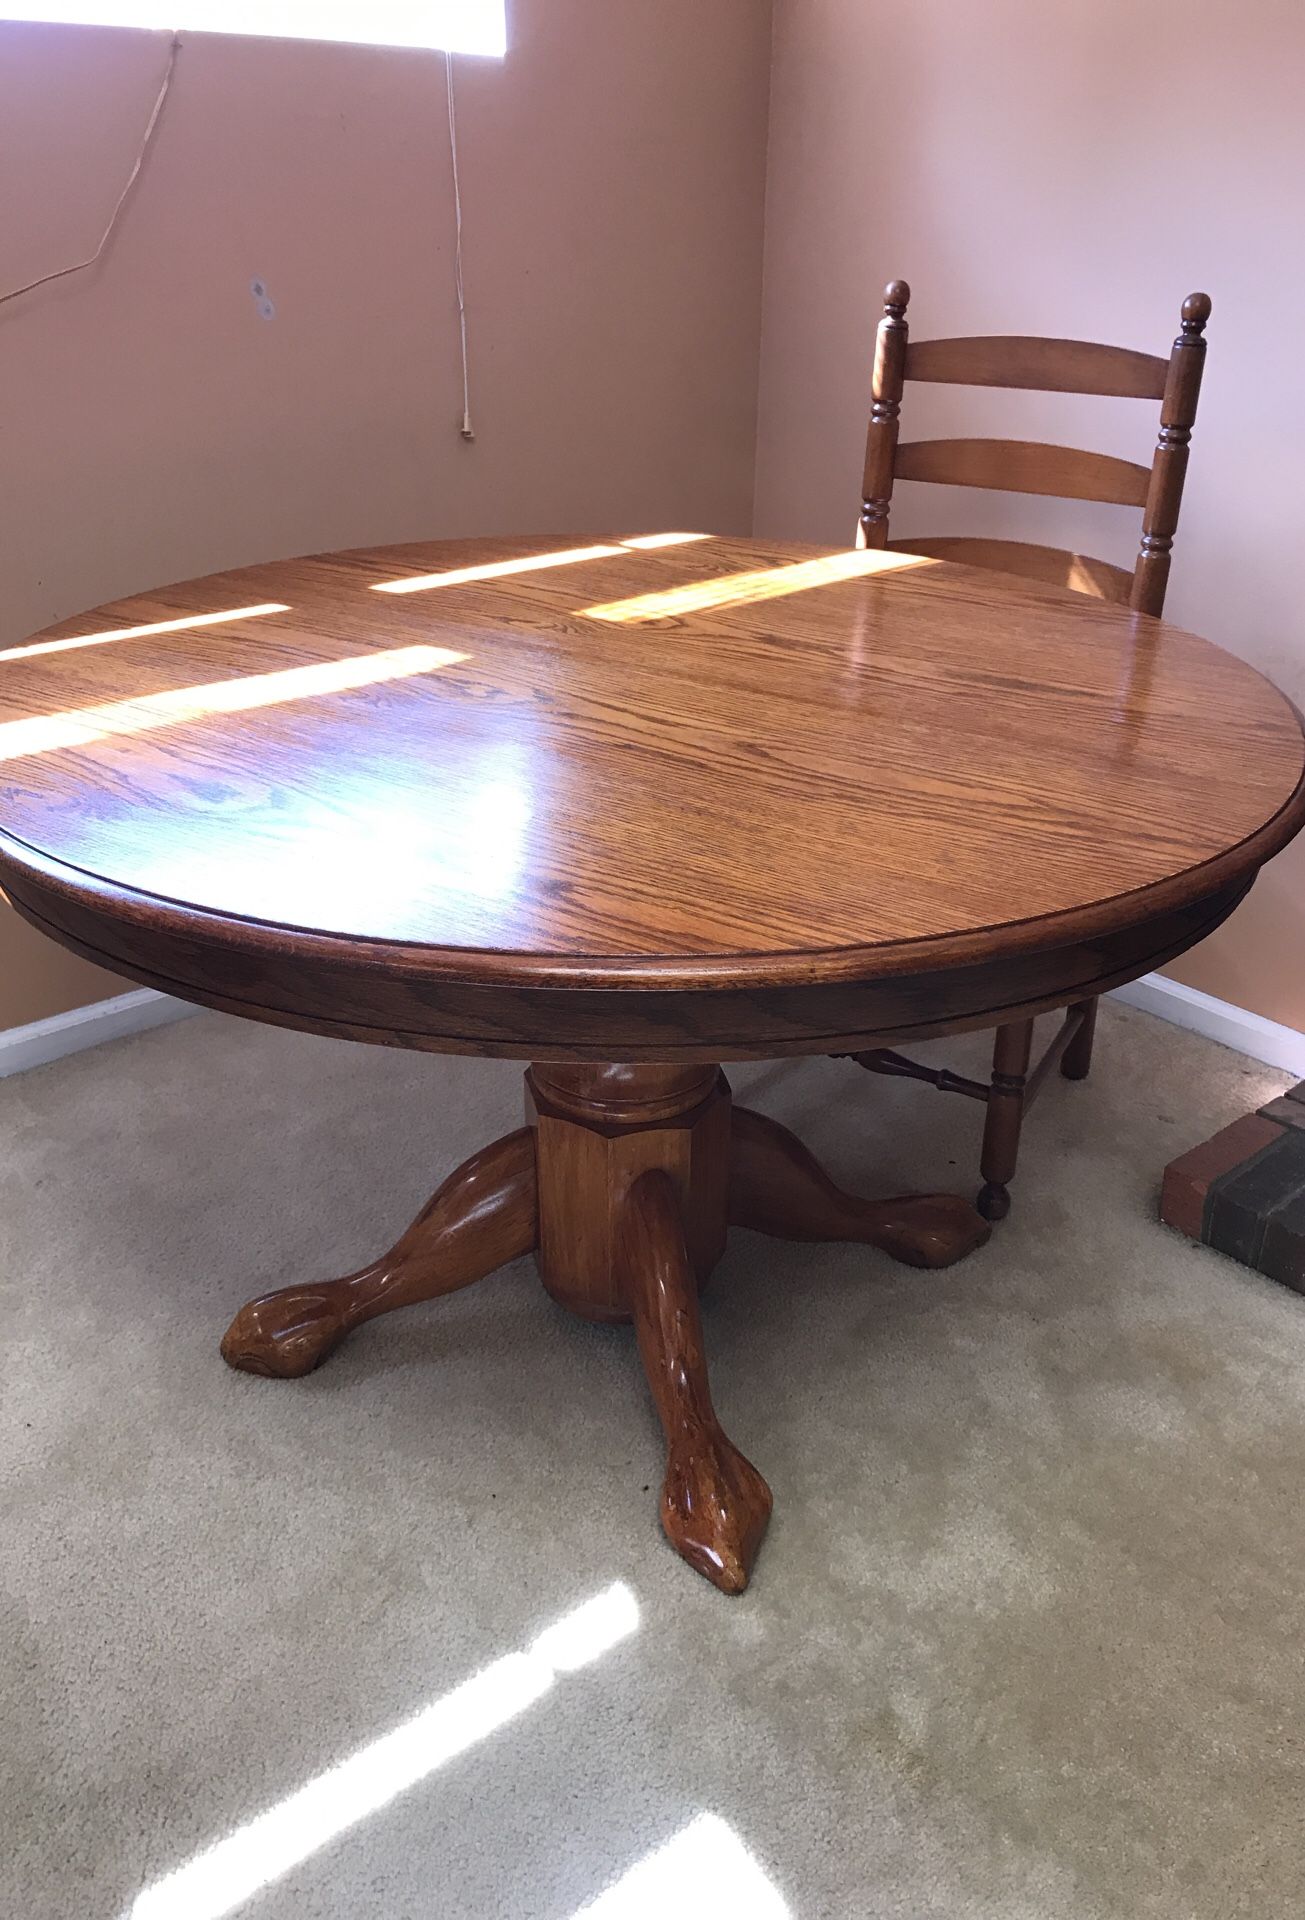 Claw foot oak circular kitchen table with 4 matching chairs